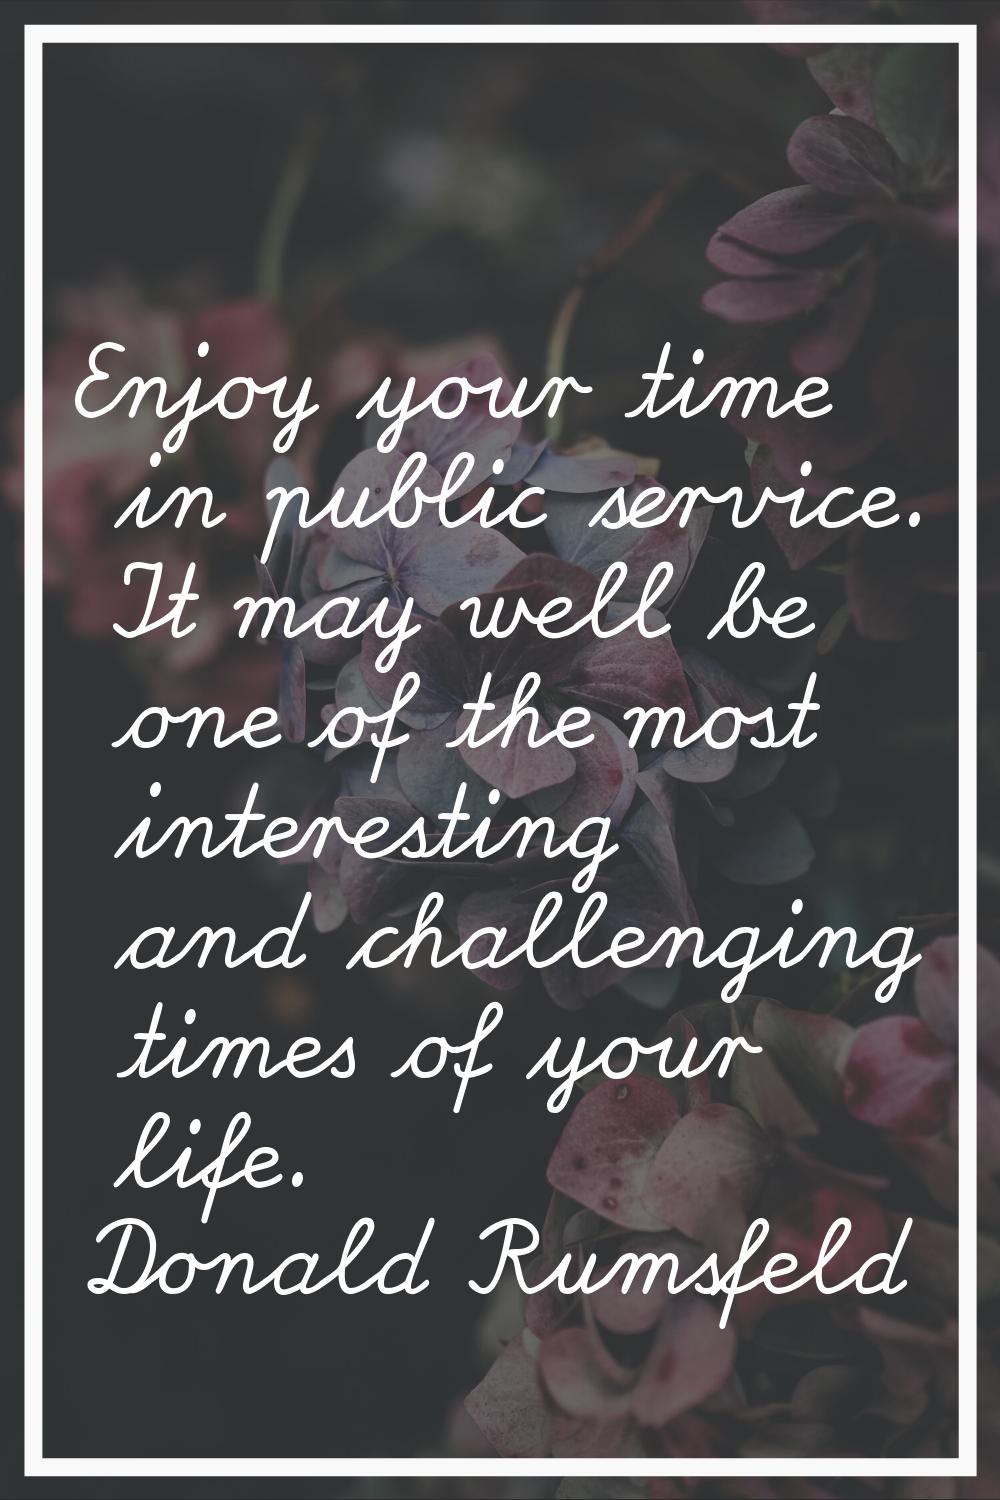 Enjoy your time in public service. It may well be one of the most interesting and challenging times